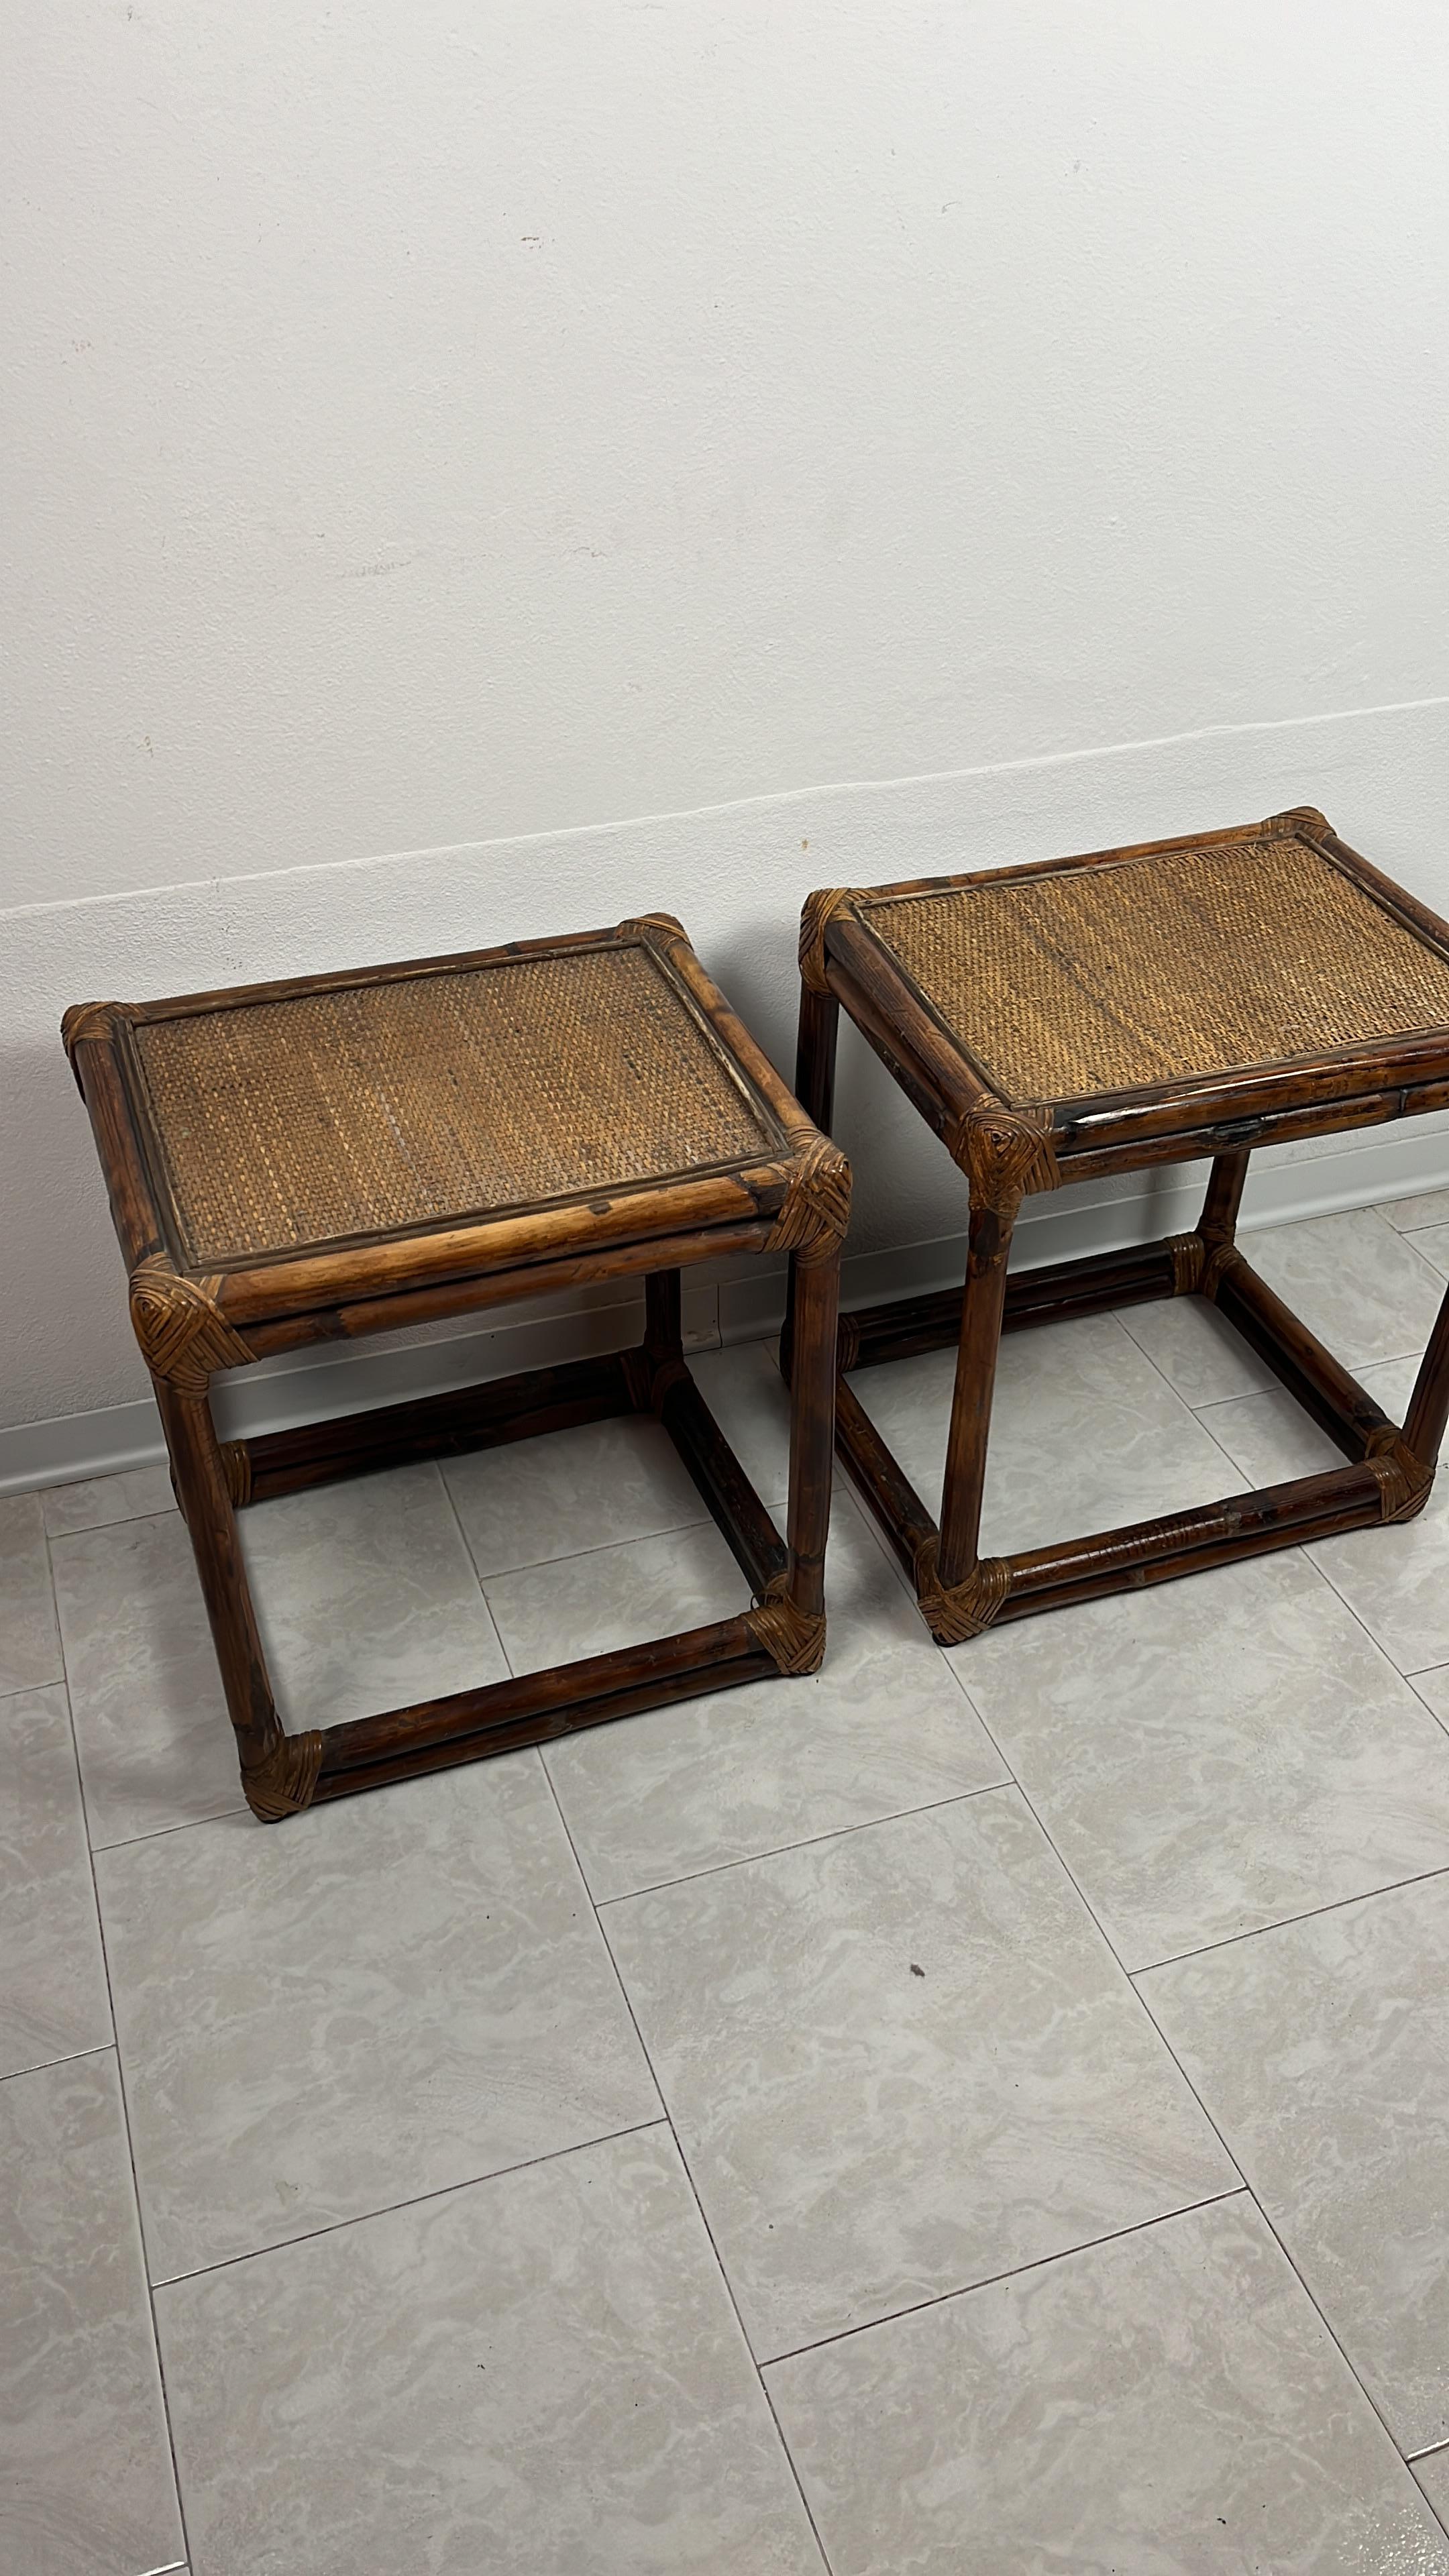 Pair of Bamboo Bedside Tables, Italy, 1960s For Sale 4